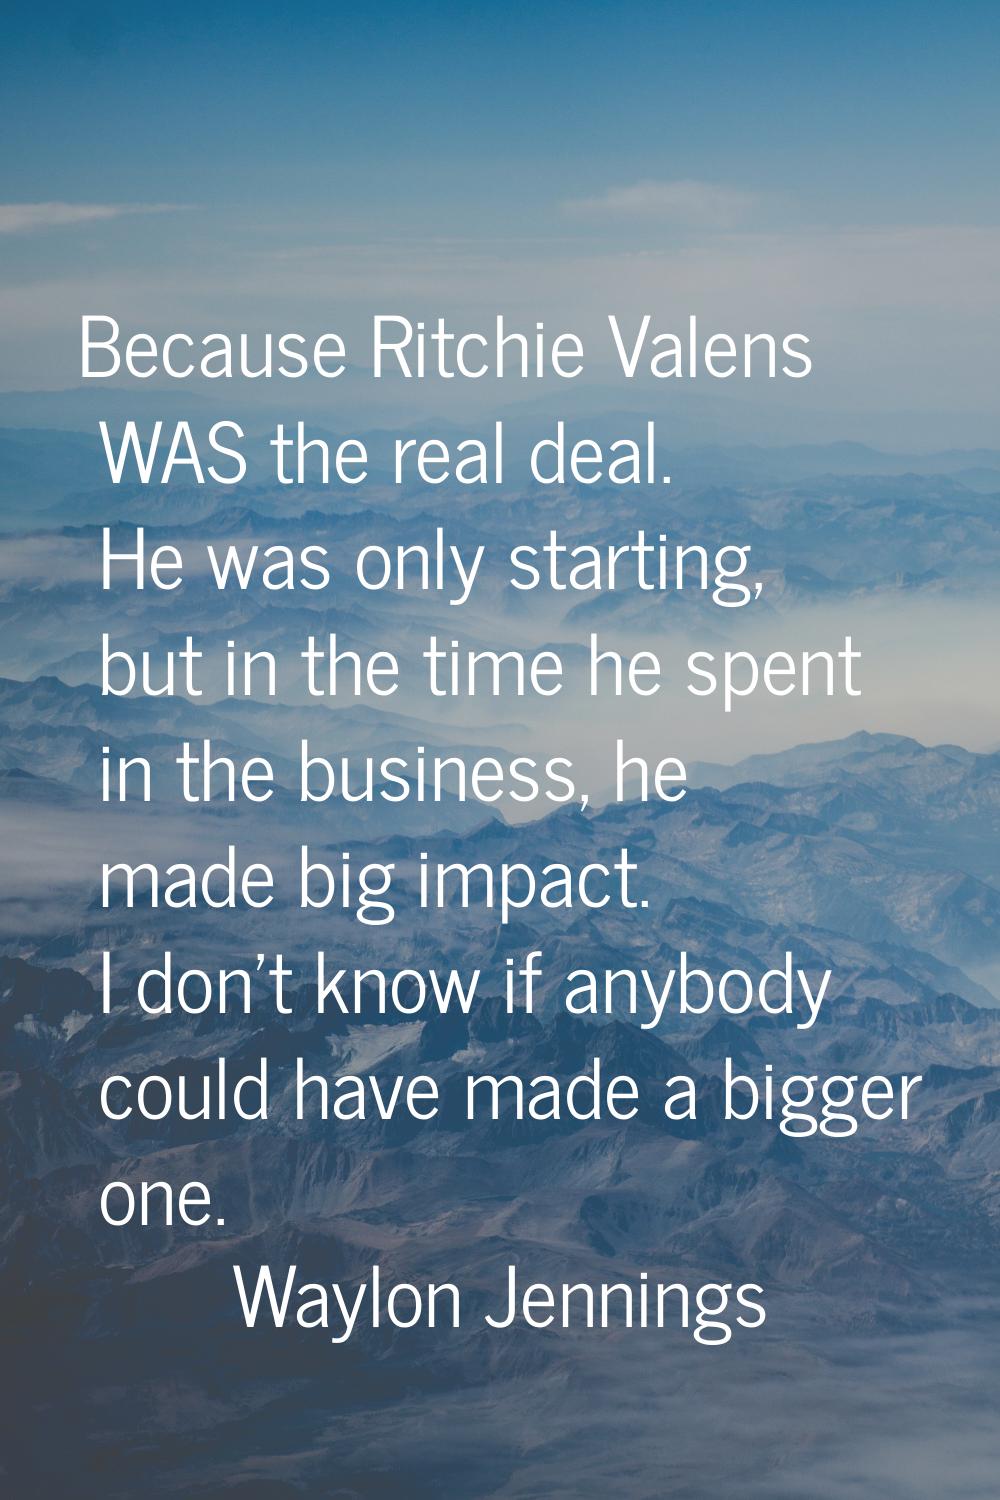 Because Ritchie Valens WAS the real deal. He was only starting, but in the time he spent in the bus